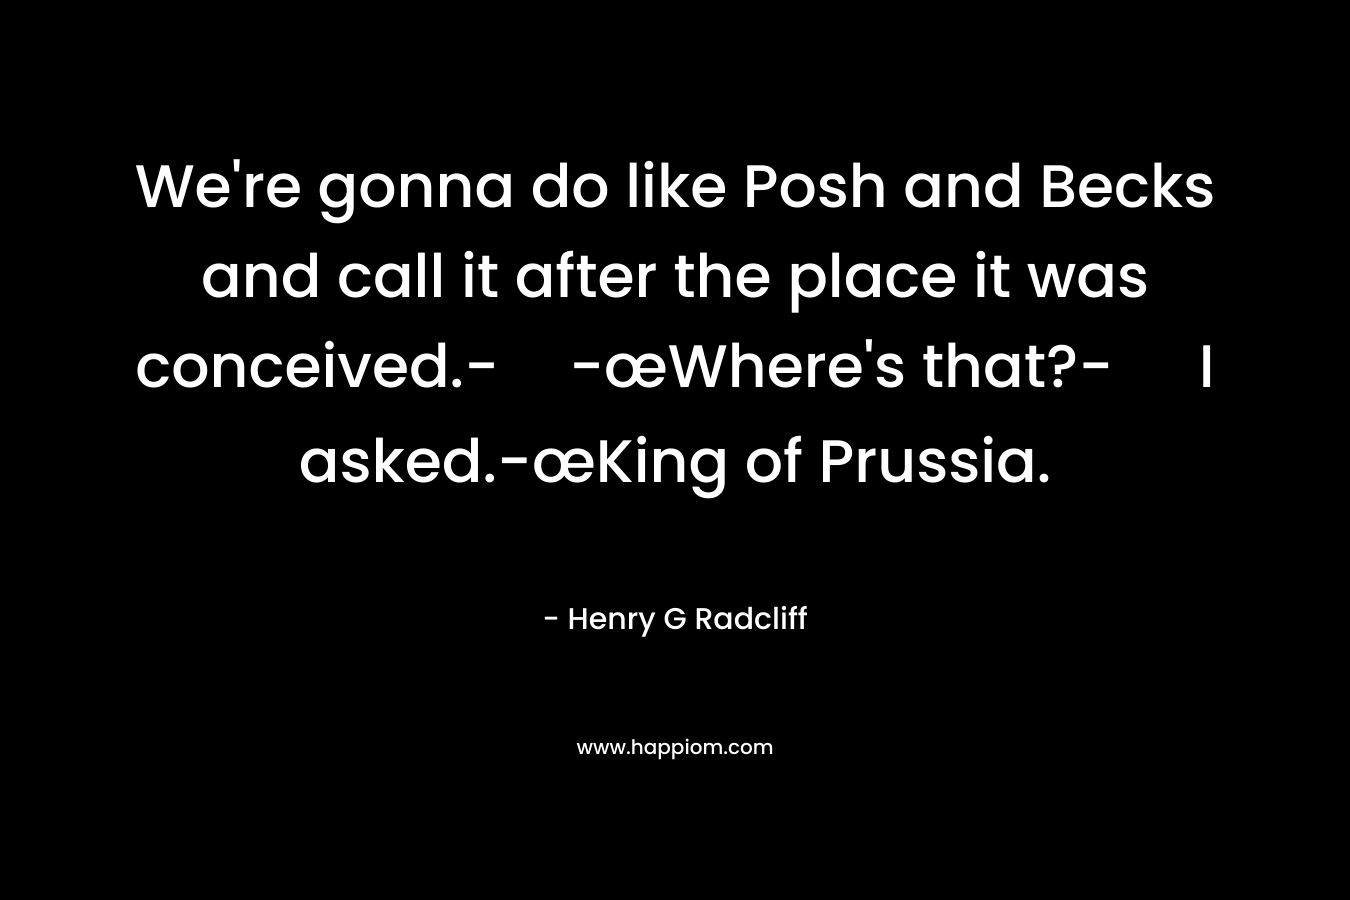 We're gonna do like Posh and Becks and call it after the place it was conceived.--œWhere's that?- I asked.-œKing of Prussia.